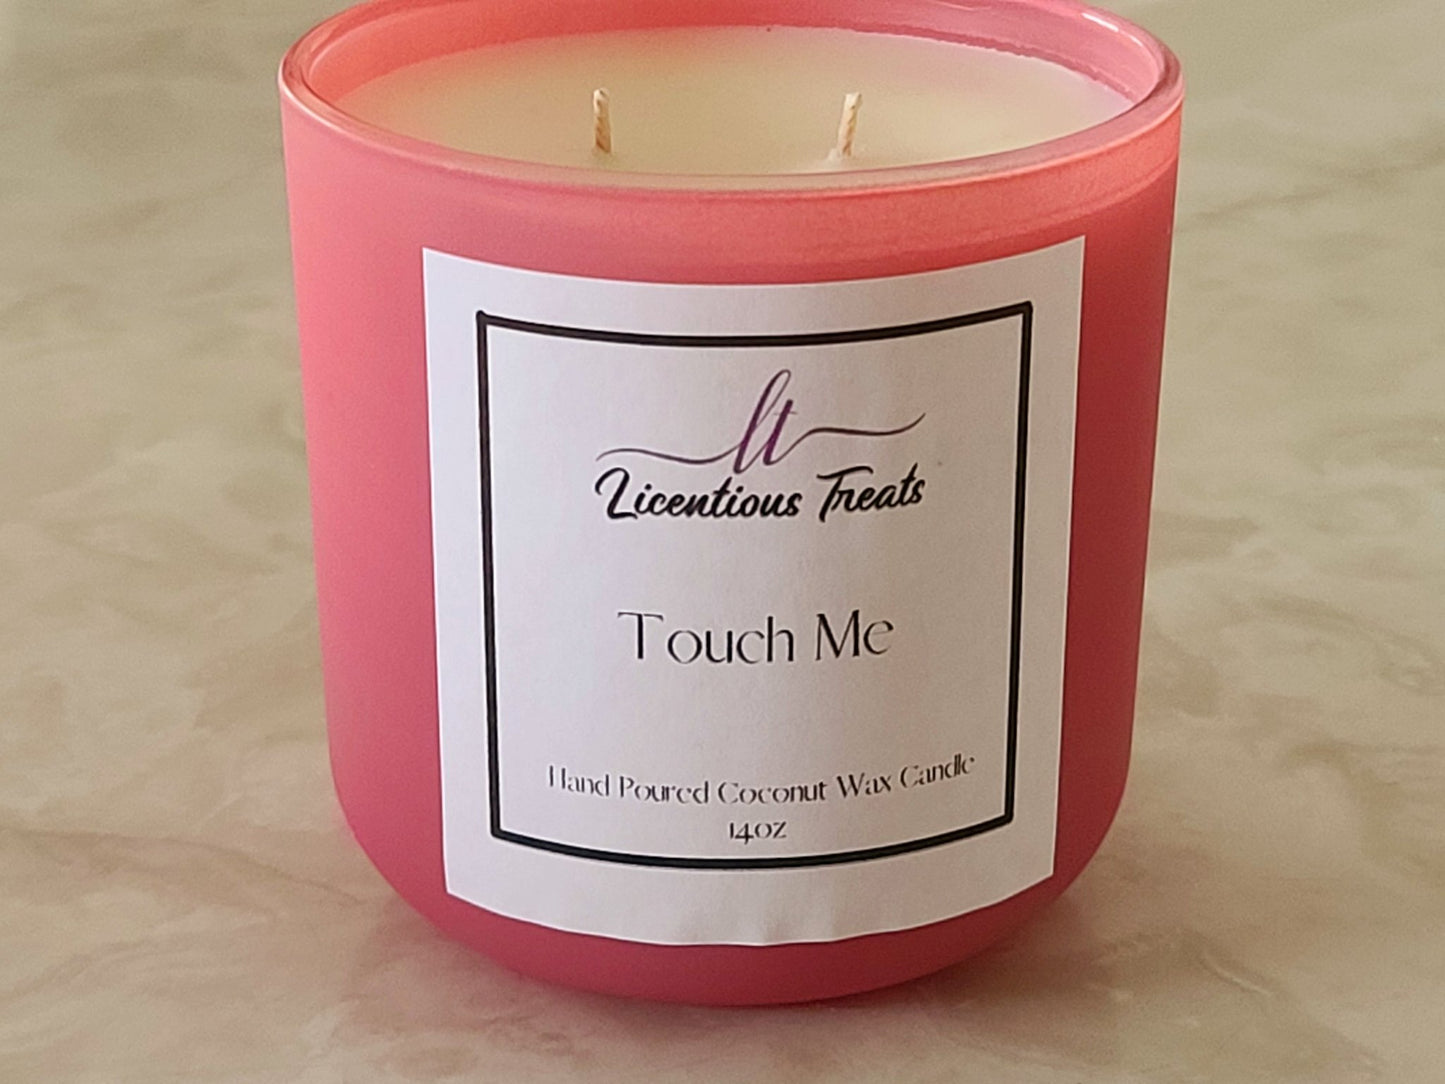 Candles - Touch Me 14oz - Licentious TreatsCandles - Touch Me 14oz